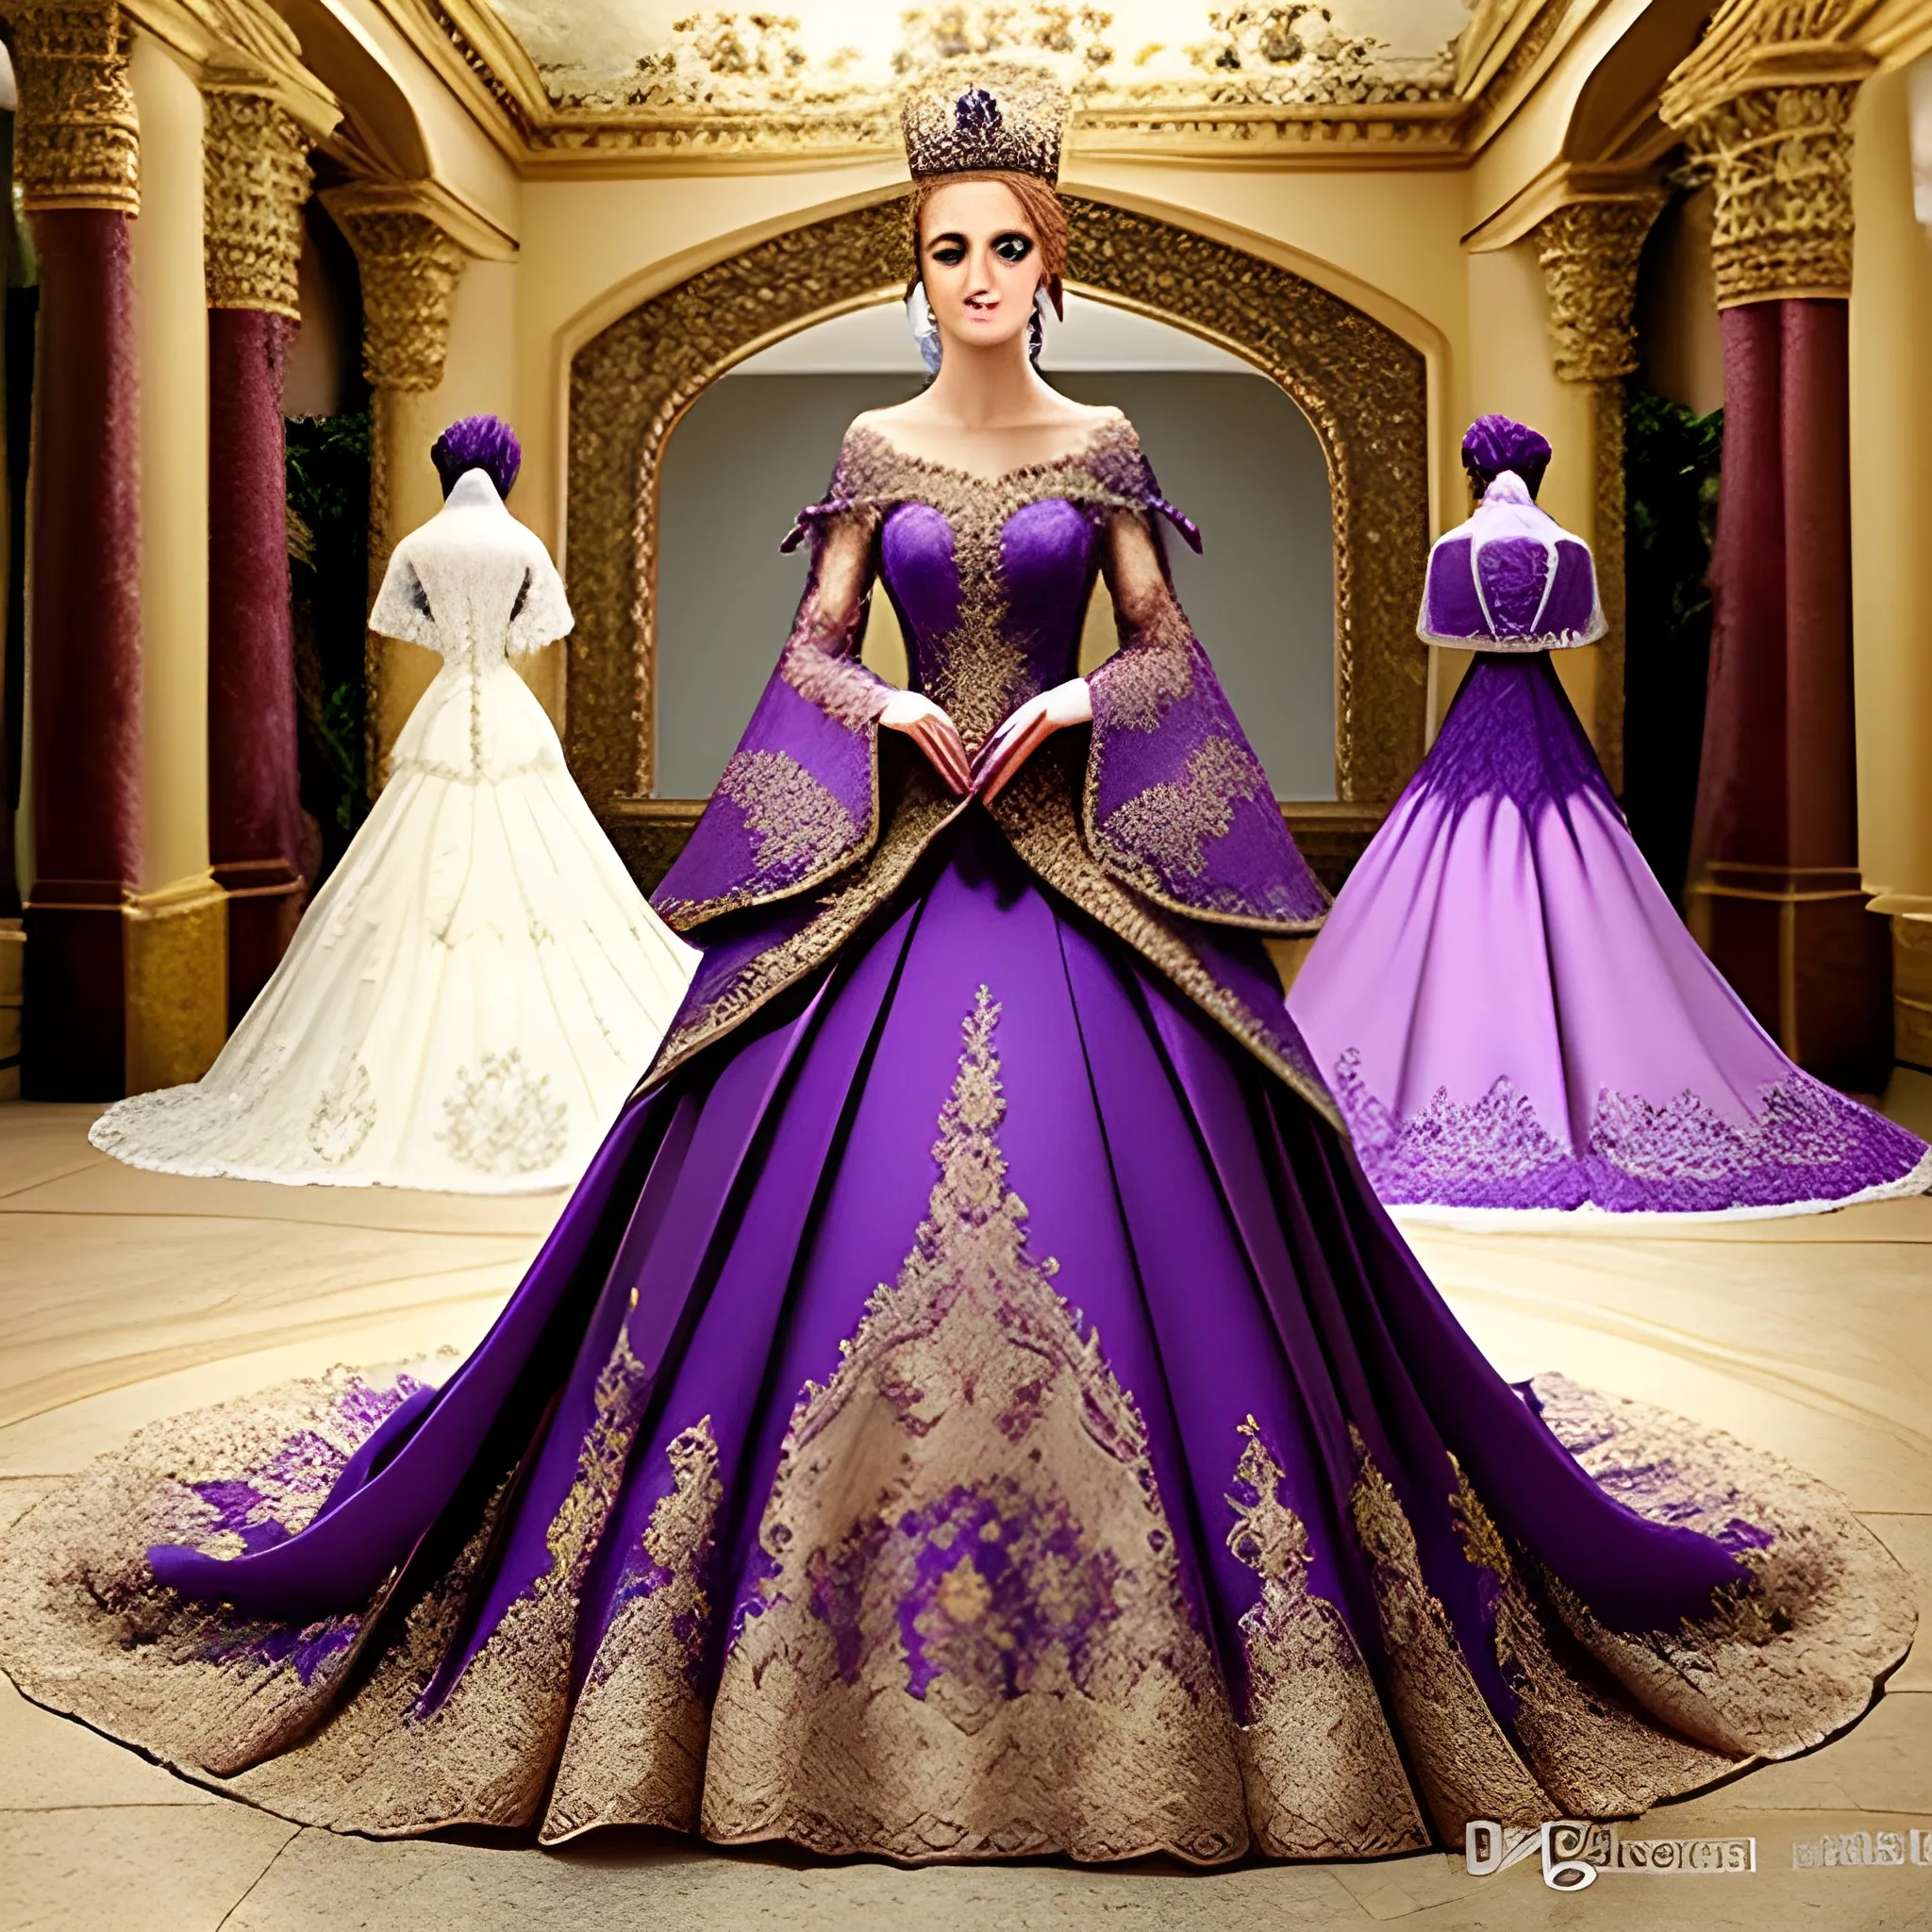 Intricate fantasy wedding gown purple and gold lace goddess train empress sleeves crown style extravagant lace detail